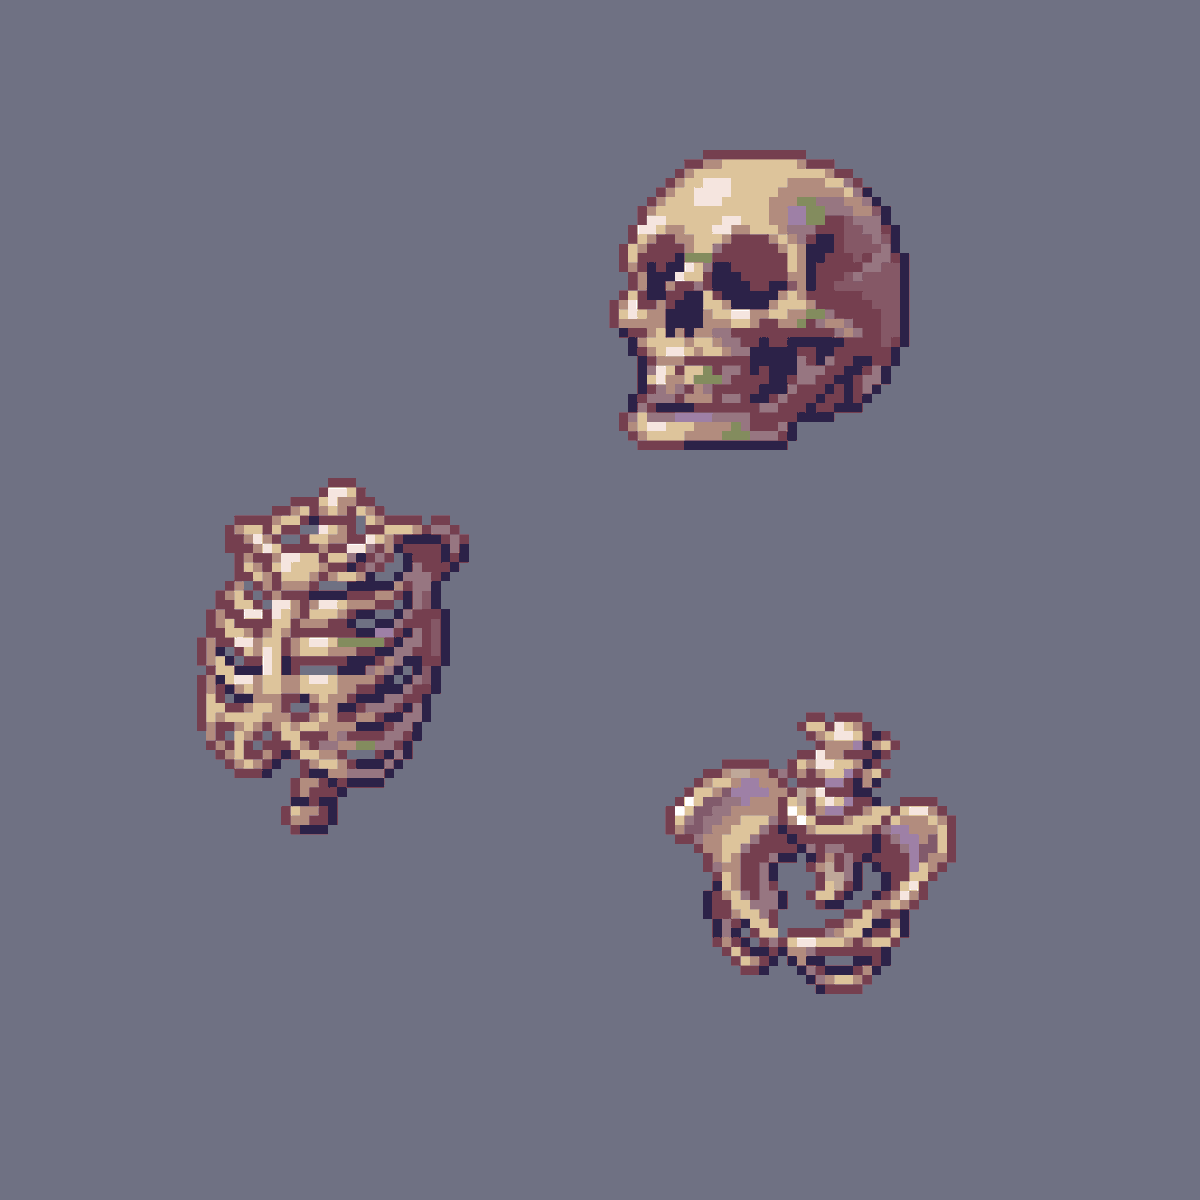 Ribcage, Skull, and Pelvis! (32x32) #pixelart  

The pelvis was a real challenge!